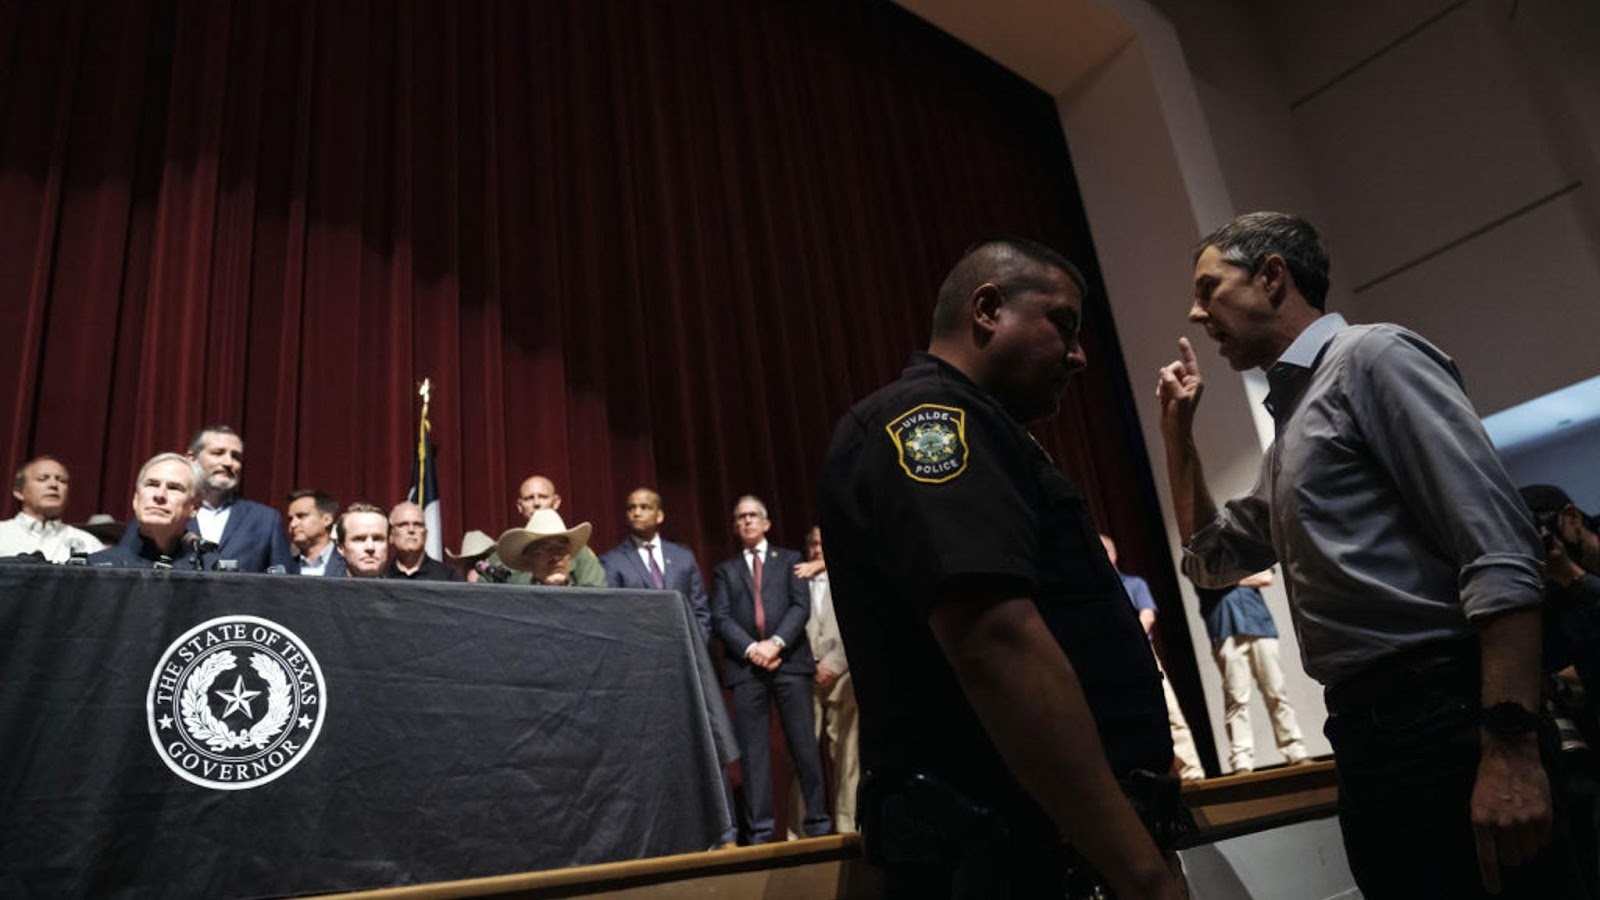 Beto O'Rourke, Democratic gubernatorial candidate for Texas, right, confronts Greg Abbott, governor of Texas, during a news conference in Uvalde, Texas, US, on Wednesday, May 25, 2022. President Joe Biden mourned the killing of at least 19 children and two teachers in a mass shooting at a Texas elementary school on Tuesday, decrying their deaths as senseless and demanding action to try to curb the violence. Photographer: Eric Thayer/Bloomberg via Getty Images